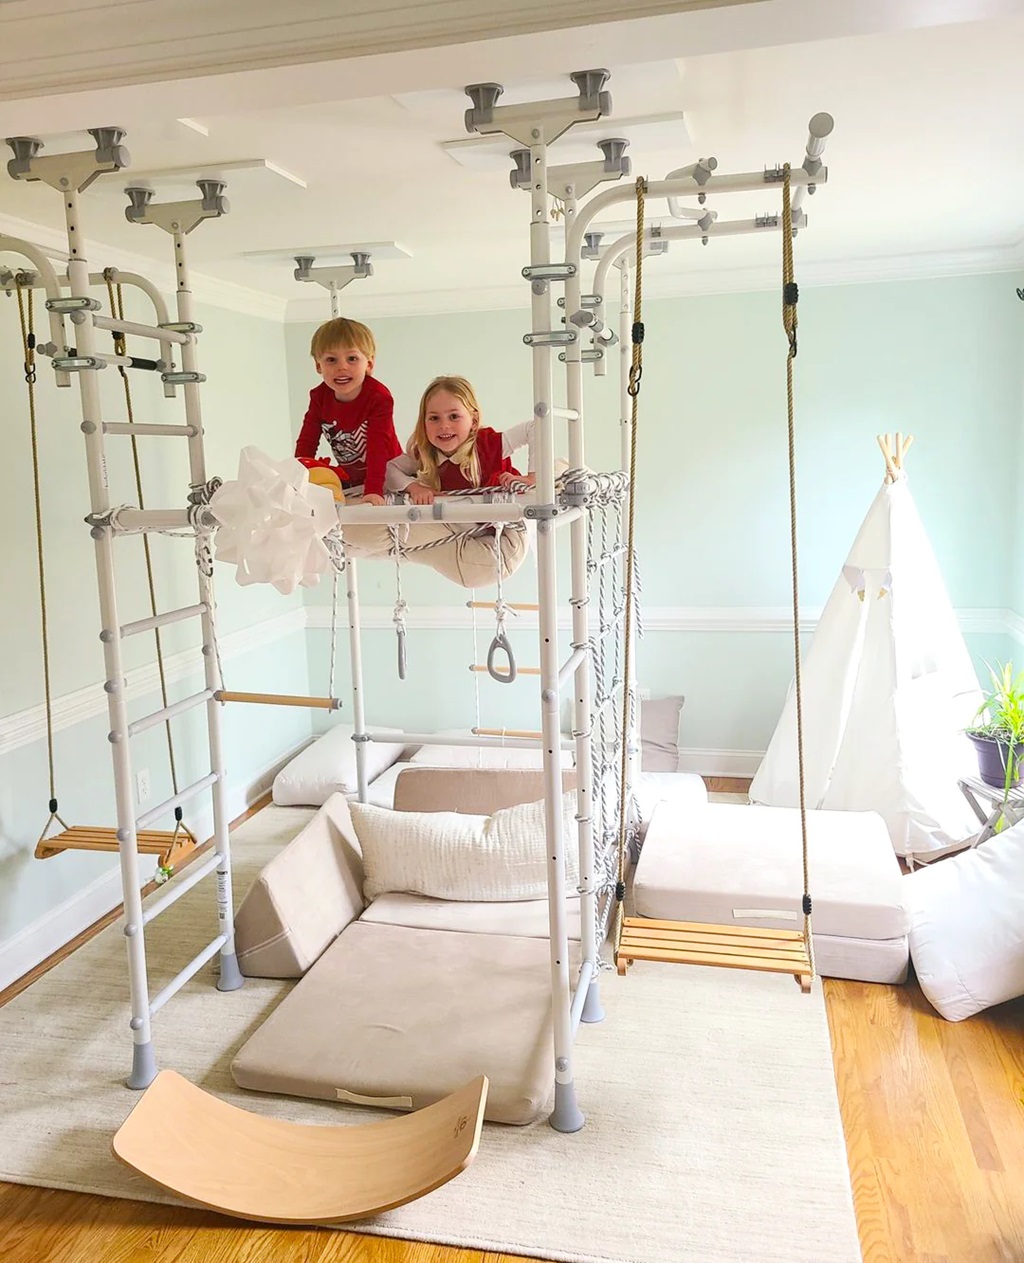 Creating A Fun Space For Kids